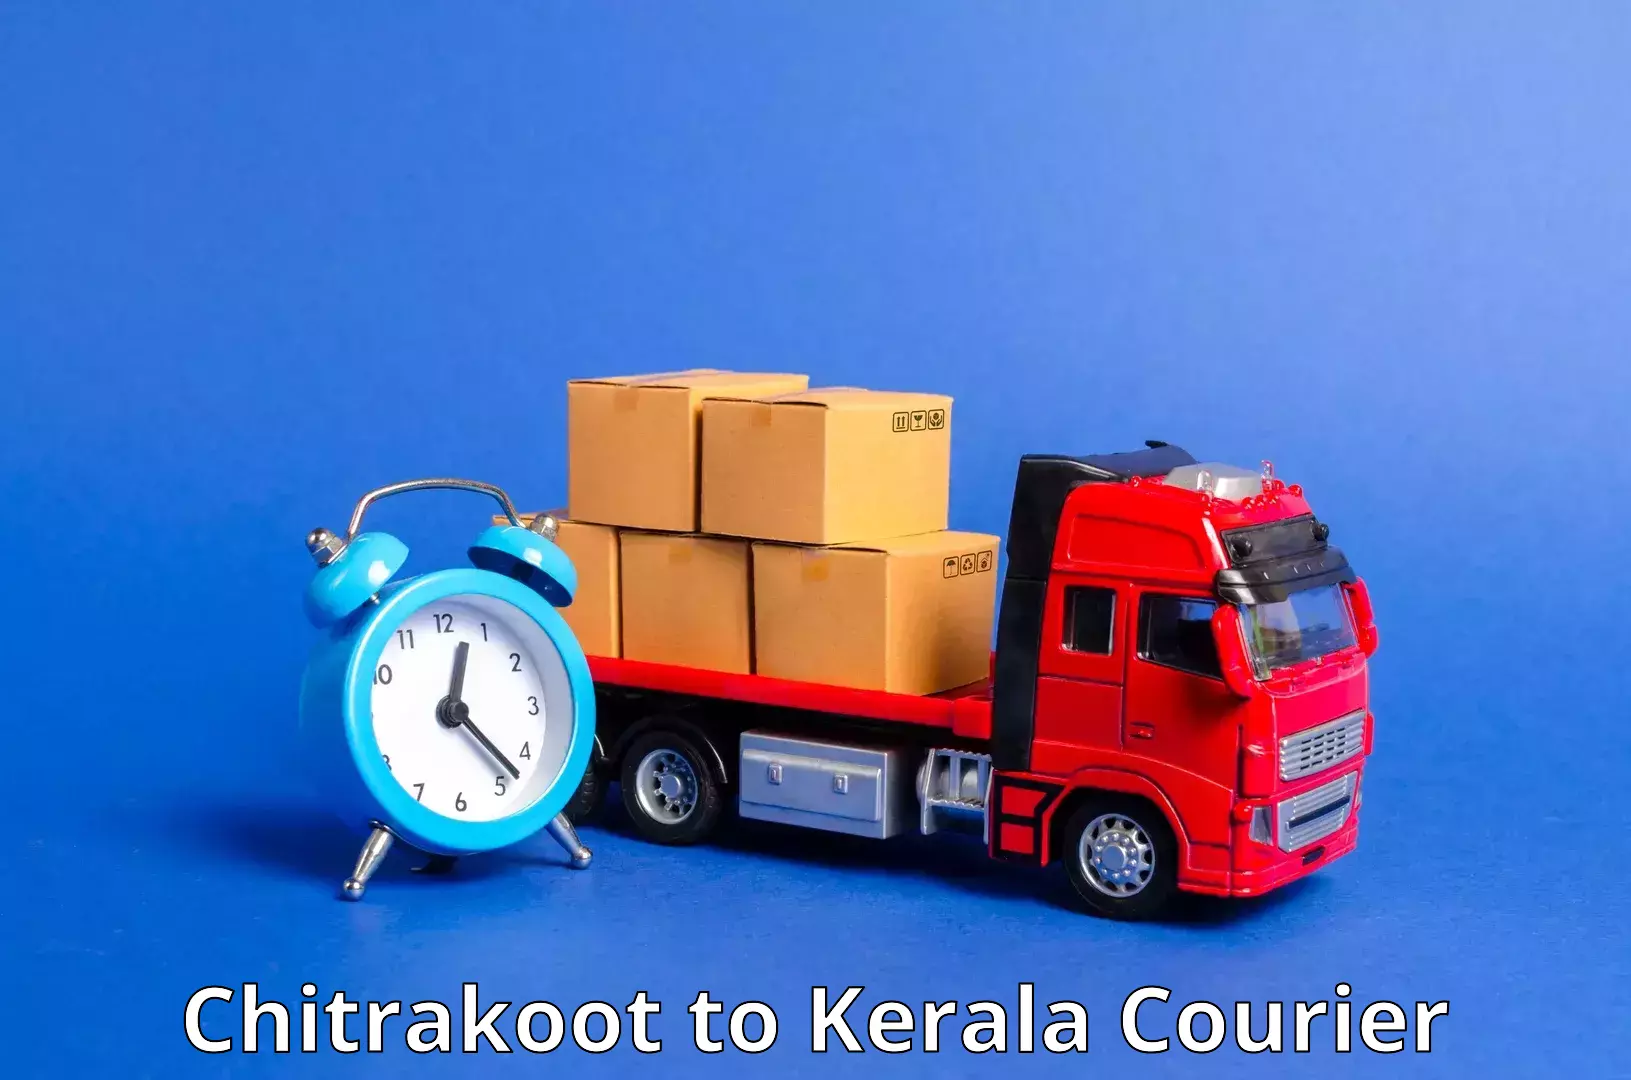 Subscription-based courier Chitrakoot to Kochi